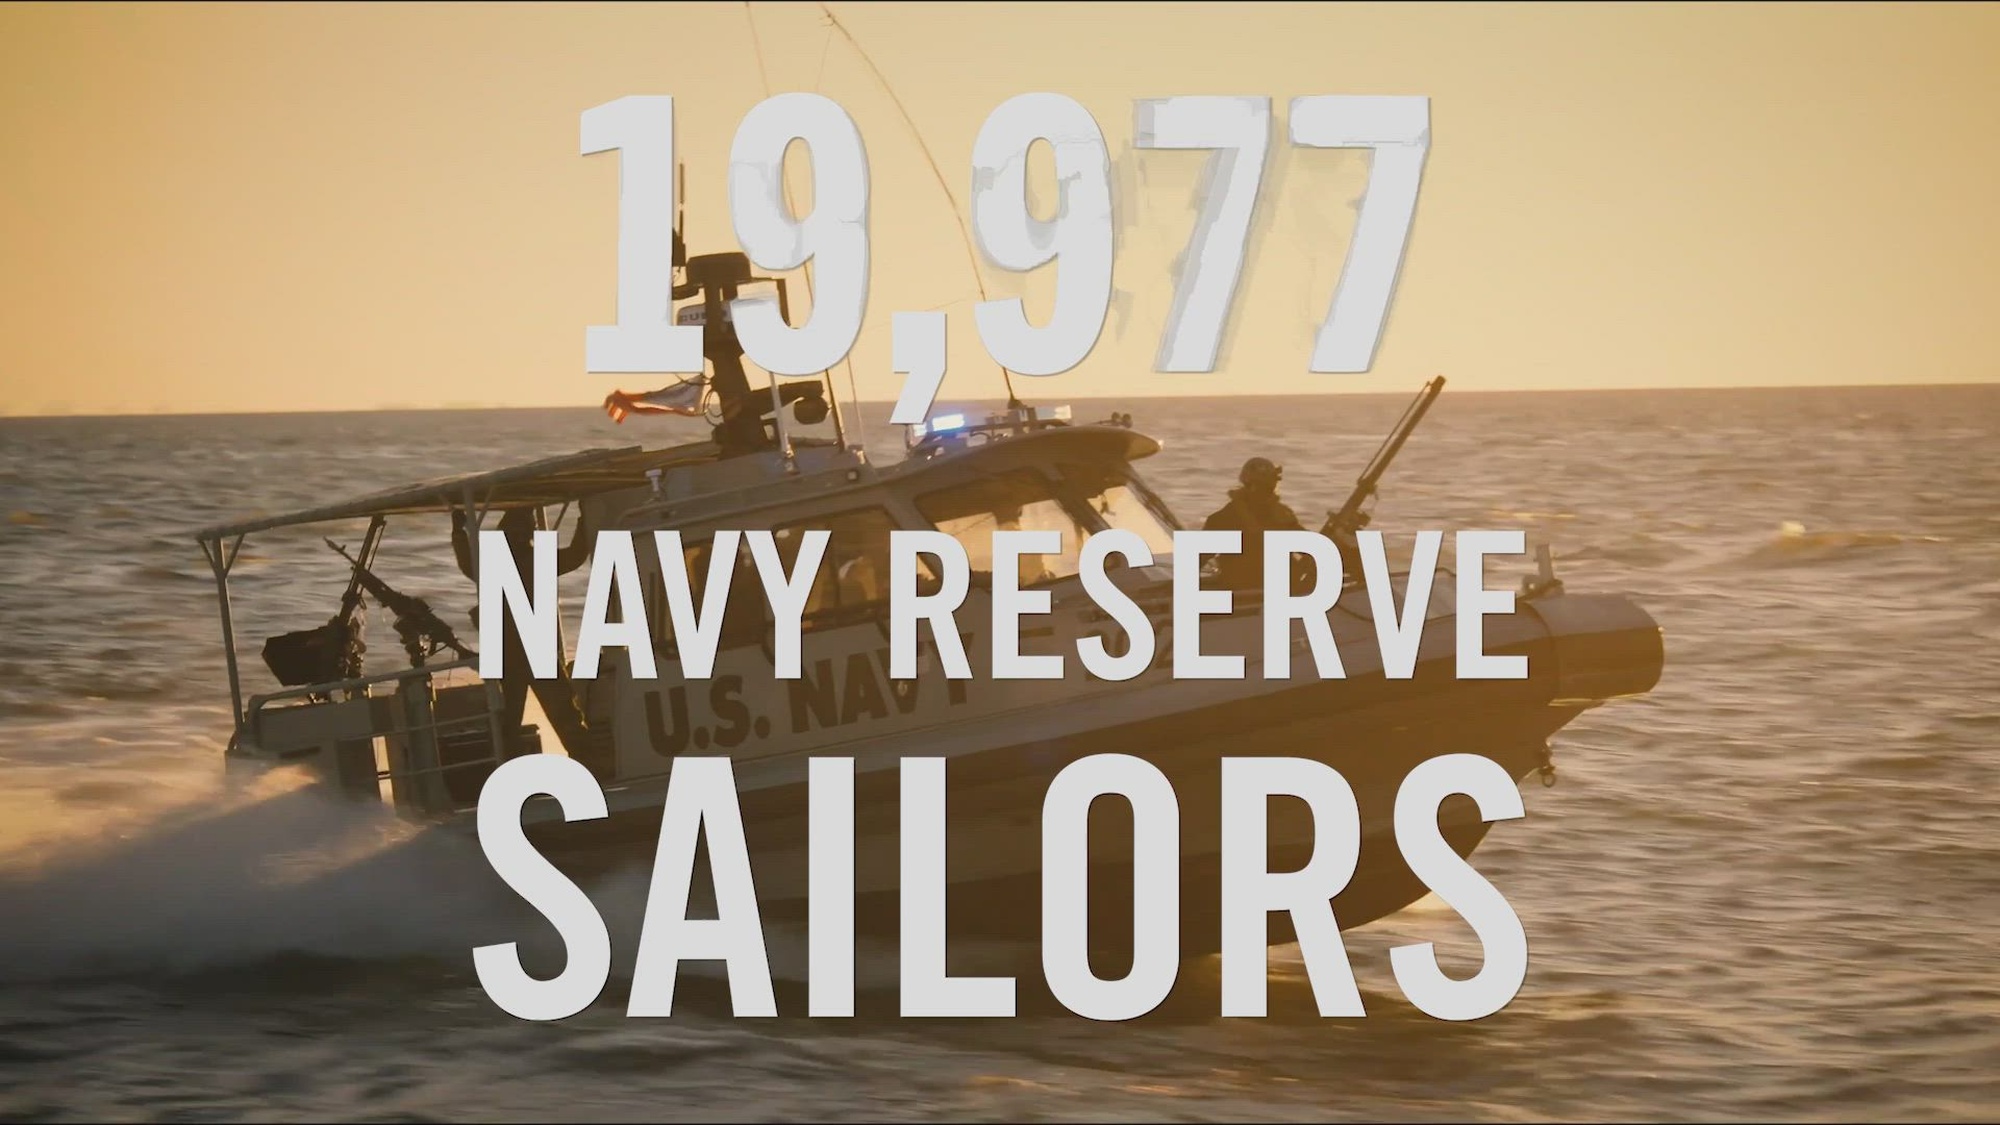 Video featuring U.S. Navy Reserve Force capabilities and units. (U.S. Navy video by Mass Communication Specialist 1st Class Arthurgwain L. Marquez)